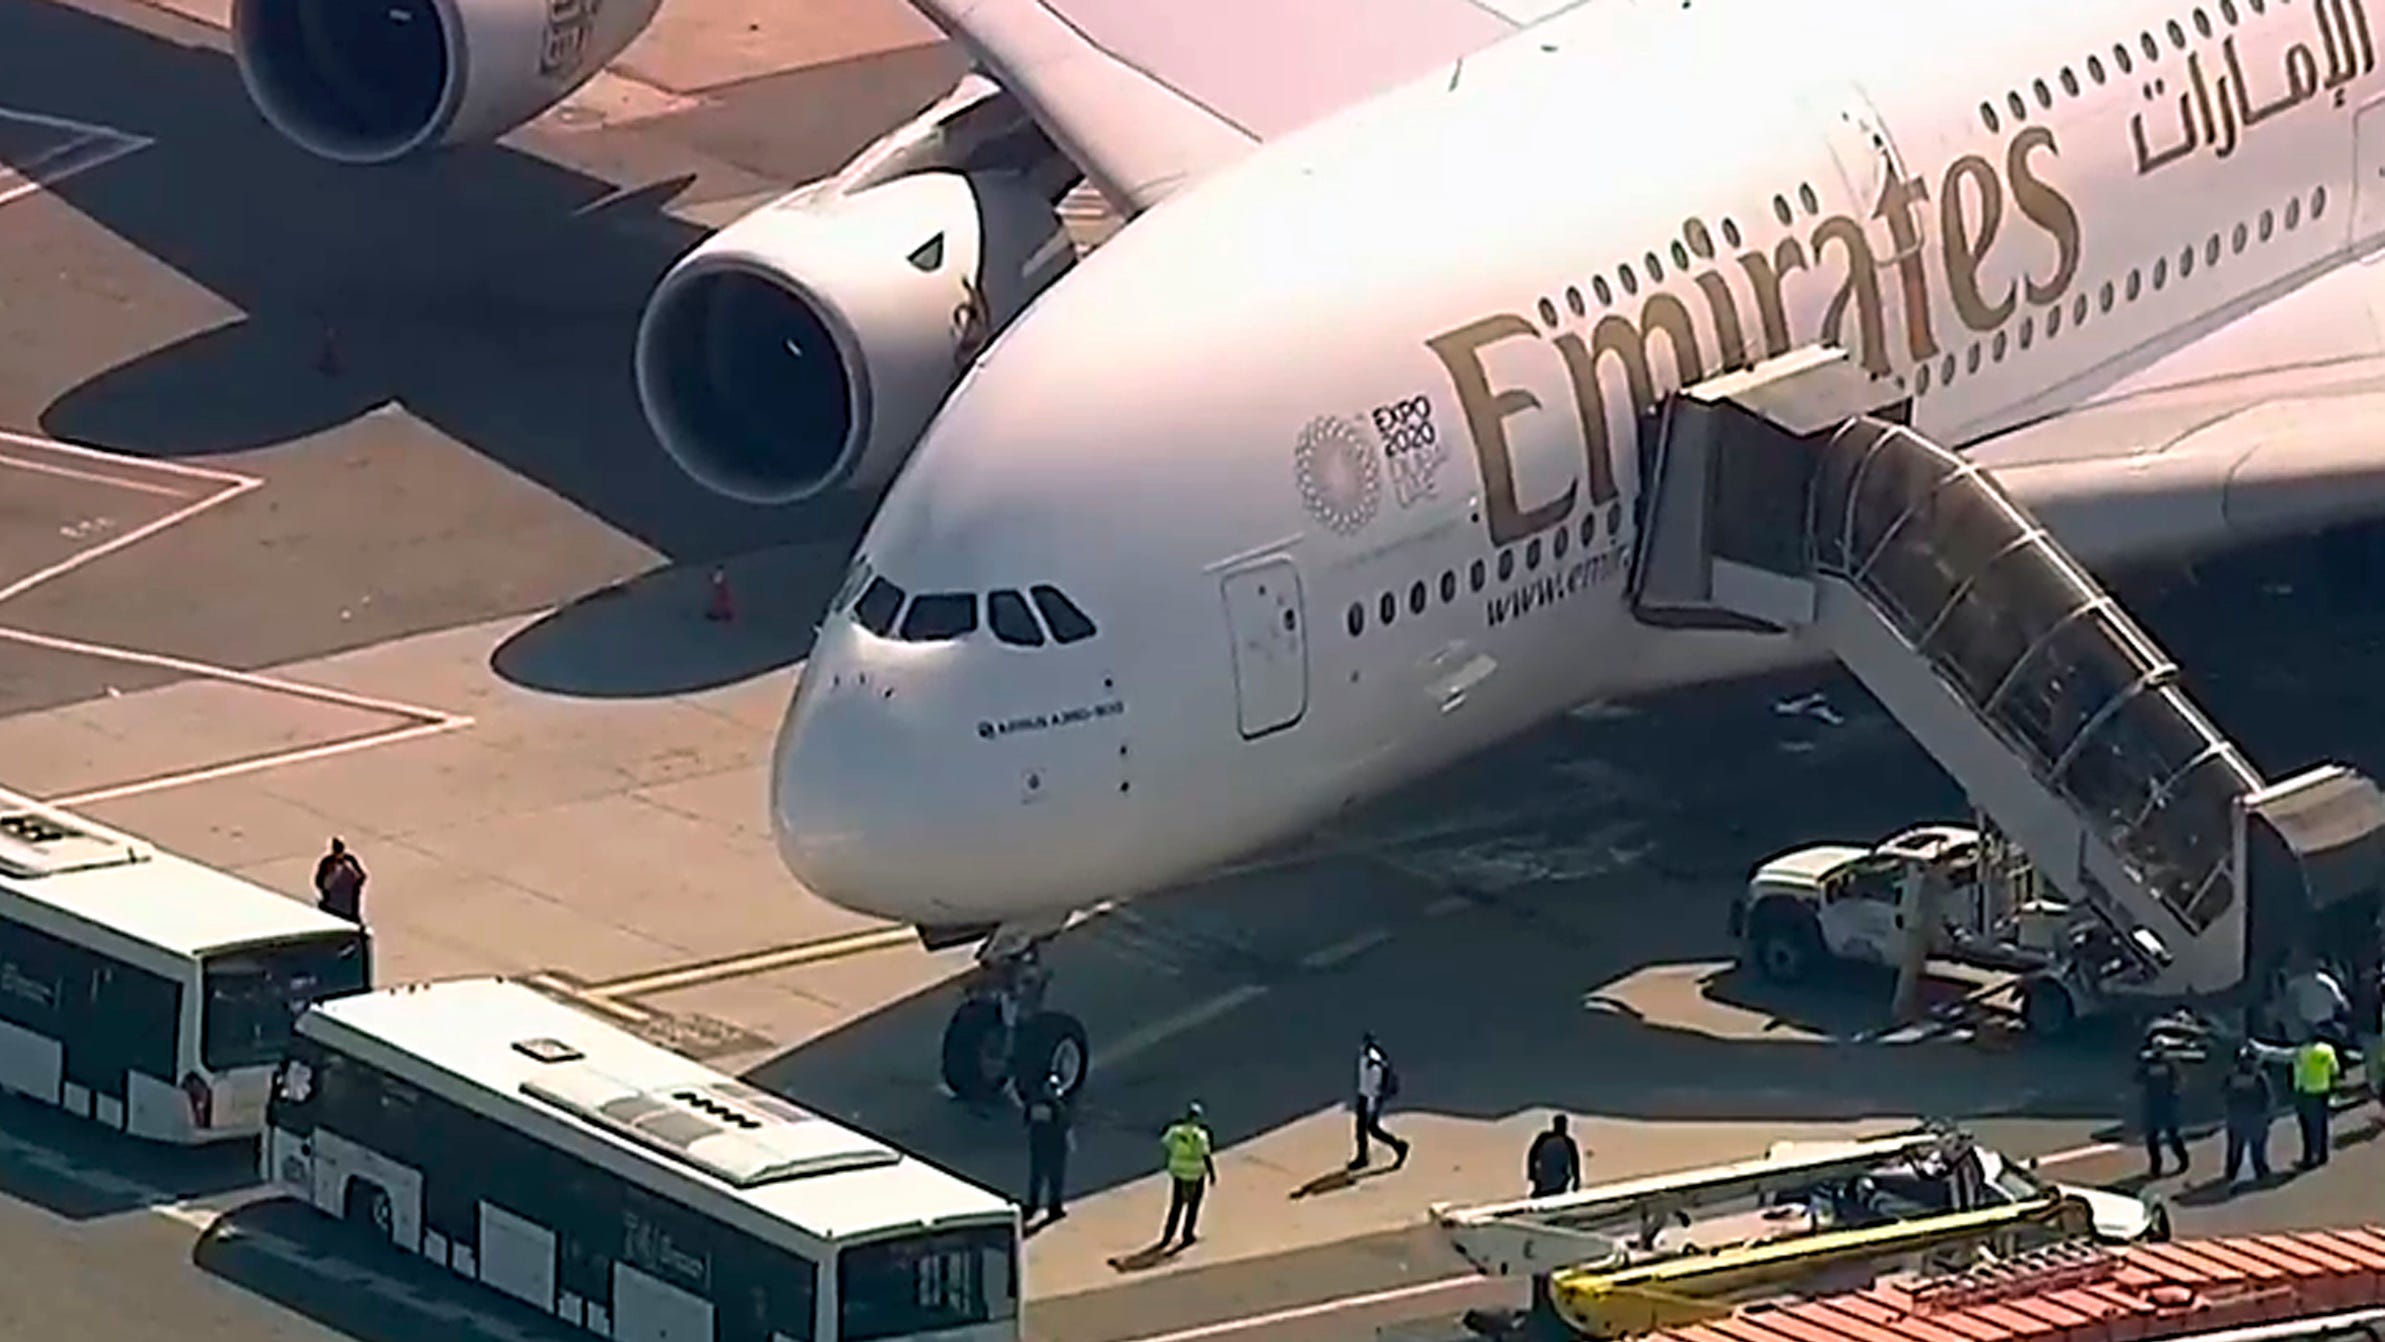 Emirates plane briefly quarantined at John F. Kennedy airport after 19 passengers are deemed sick